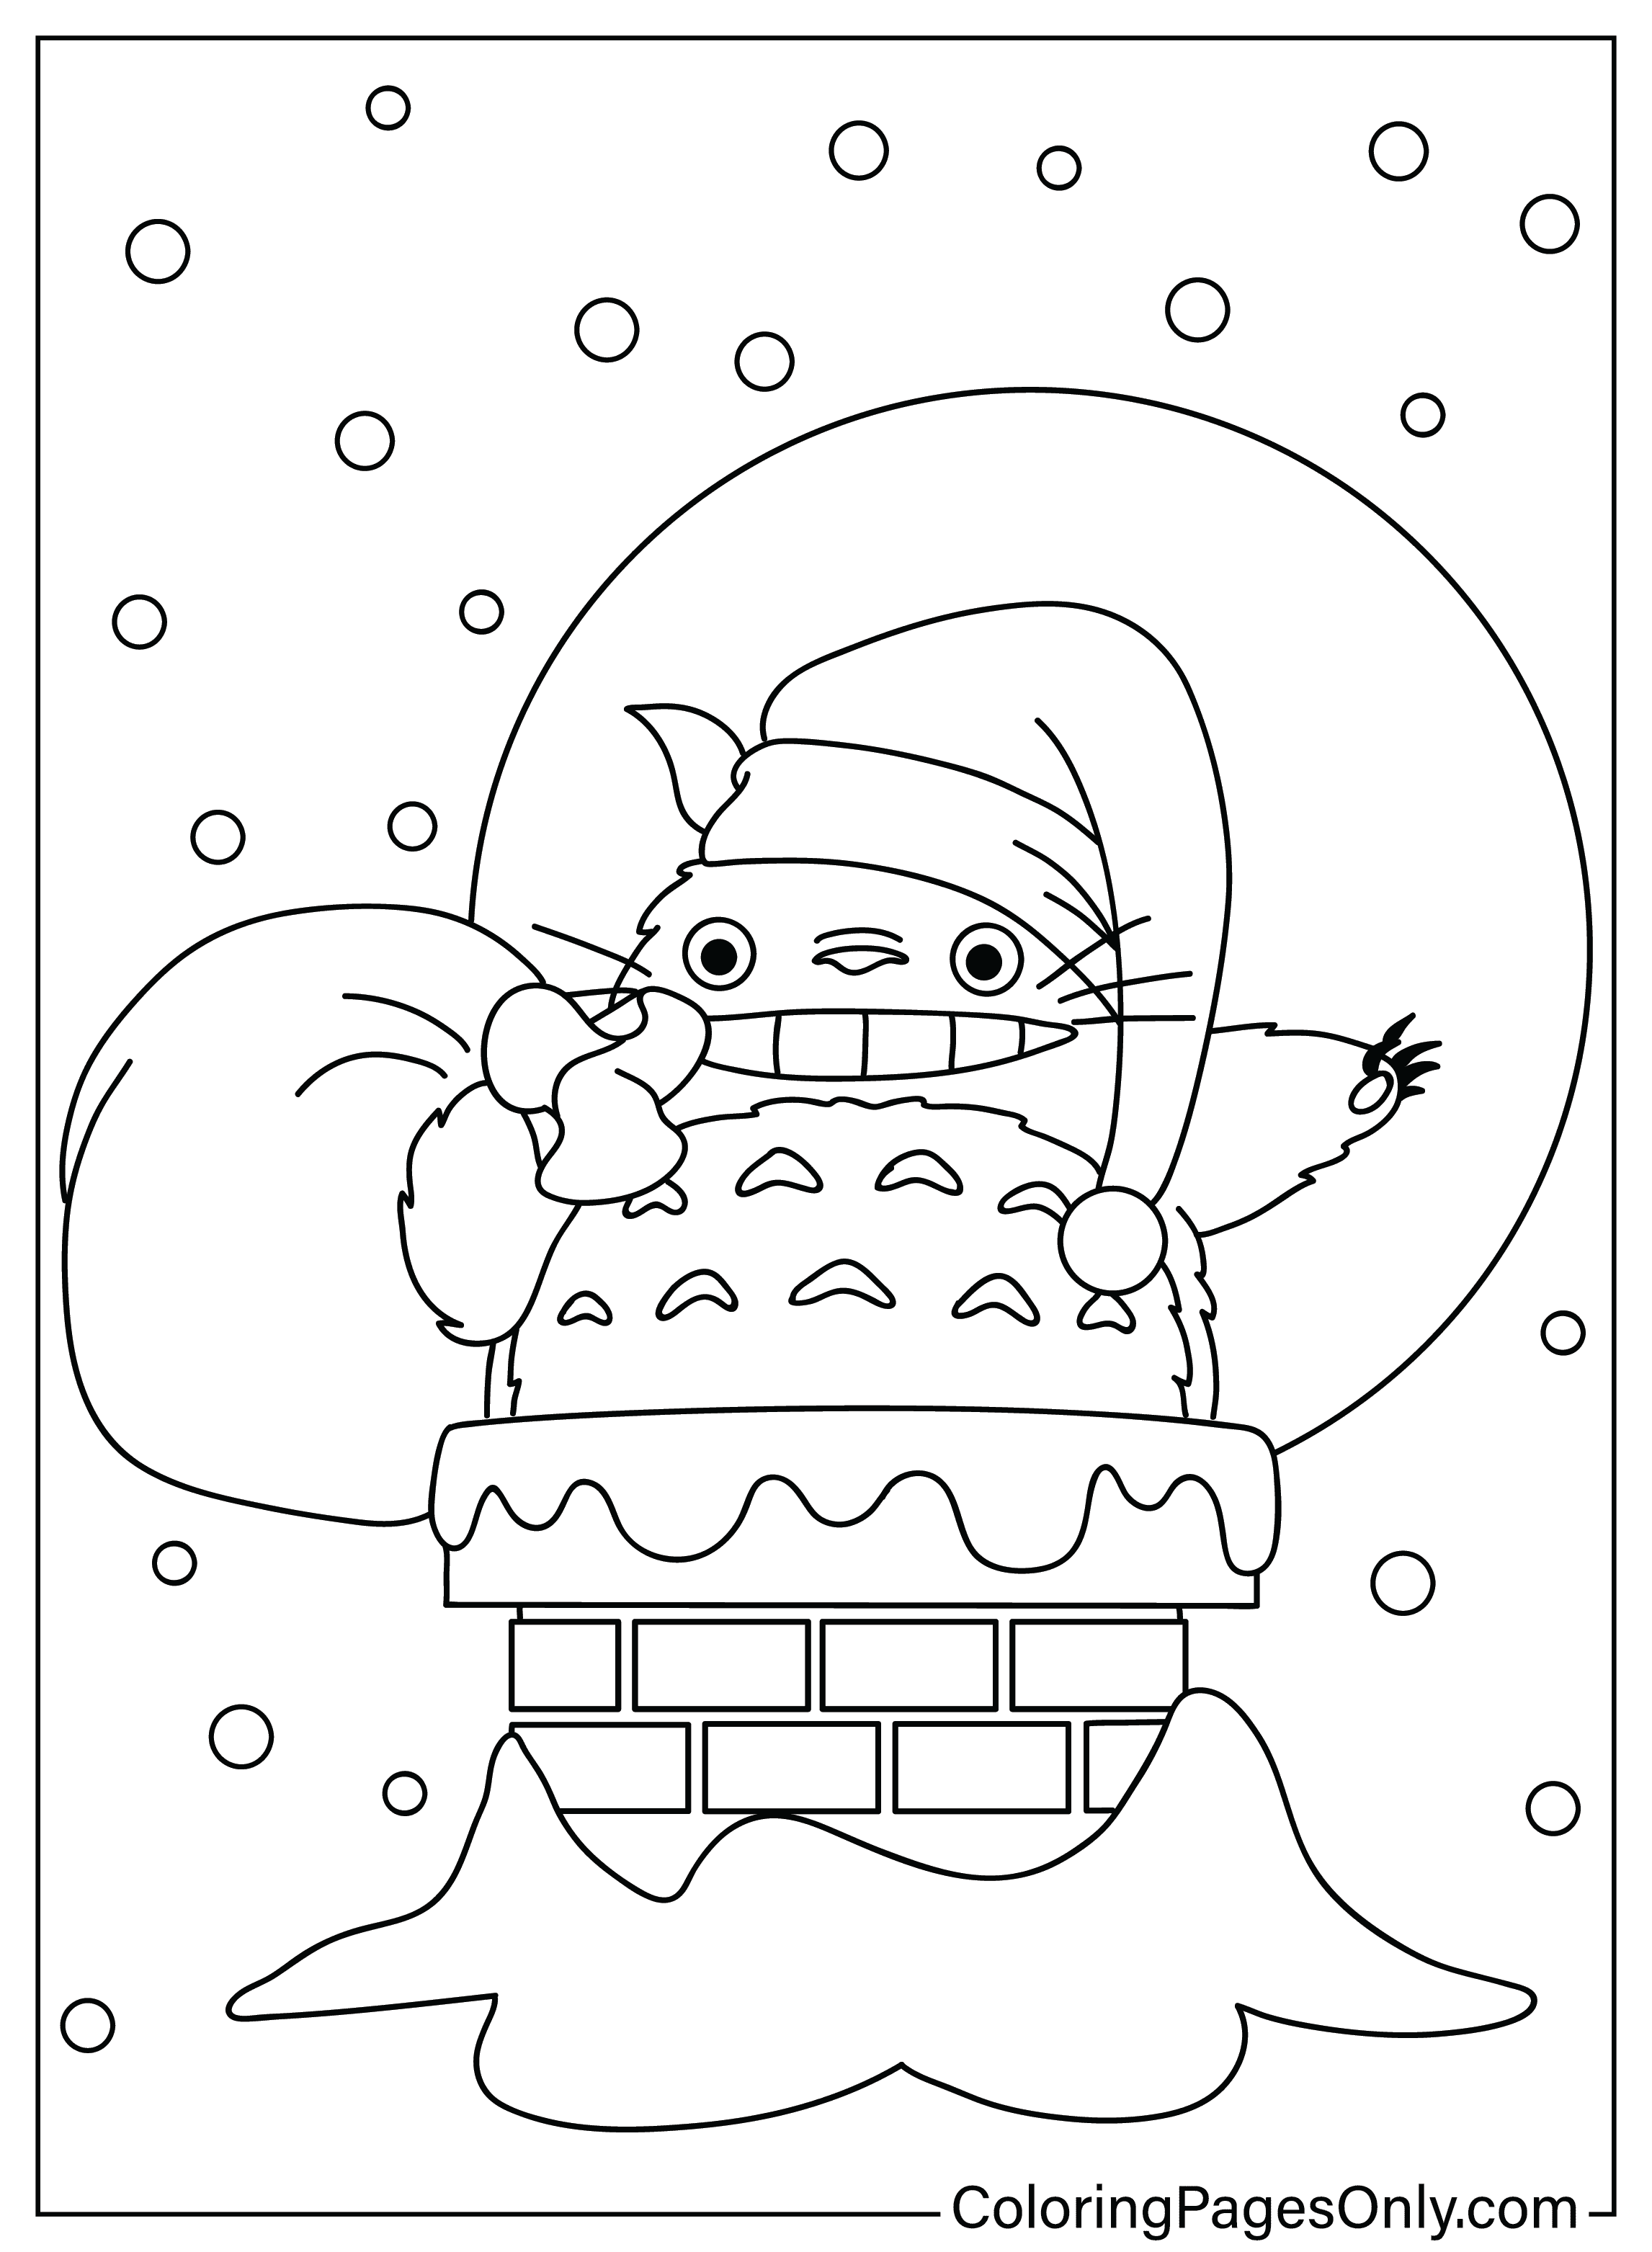 Christmas Totoro Coloring Page from Christmas Cartoon